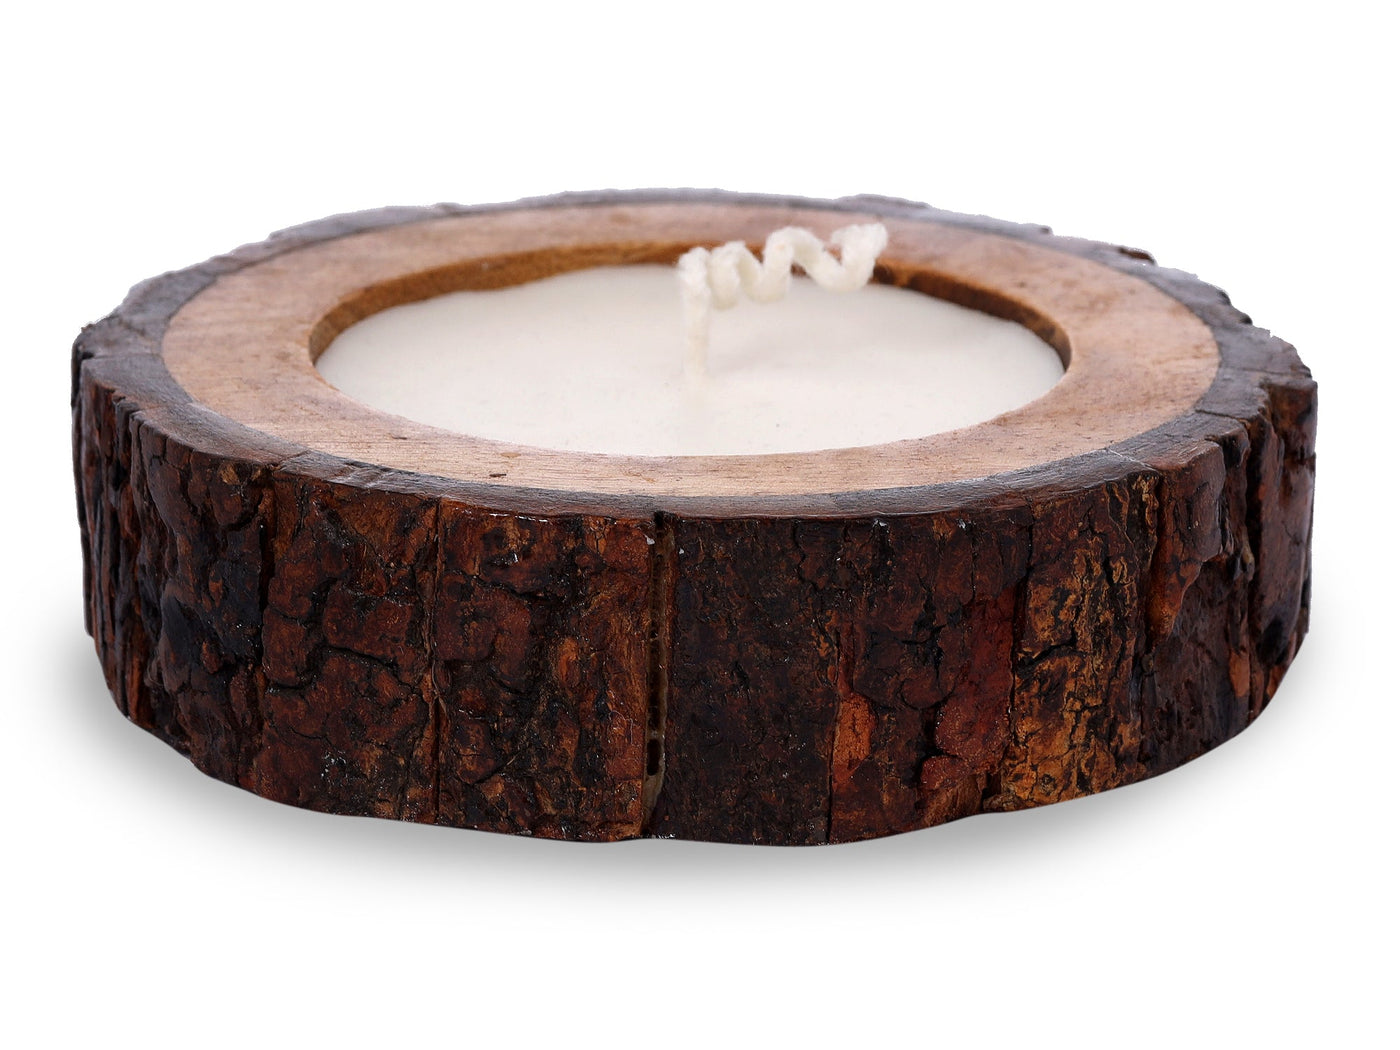 Wooden Candle Made In Soya Wax